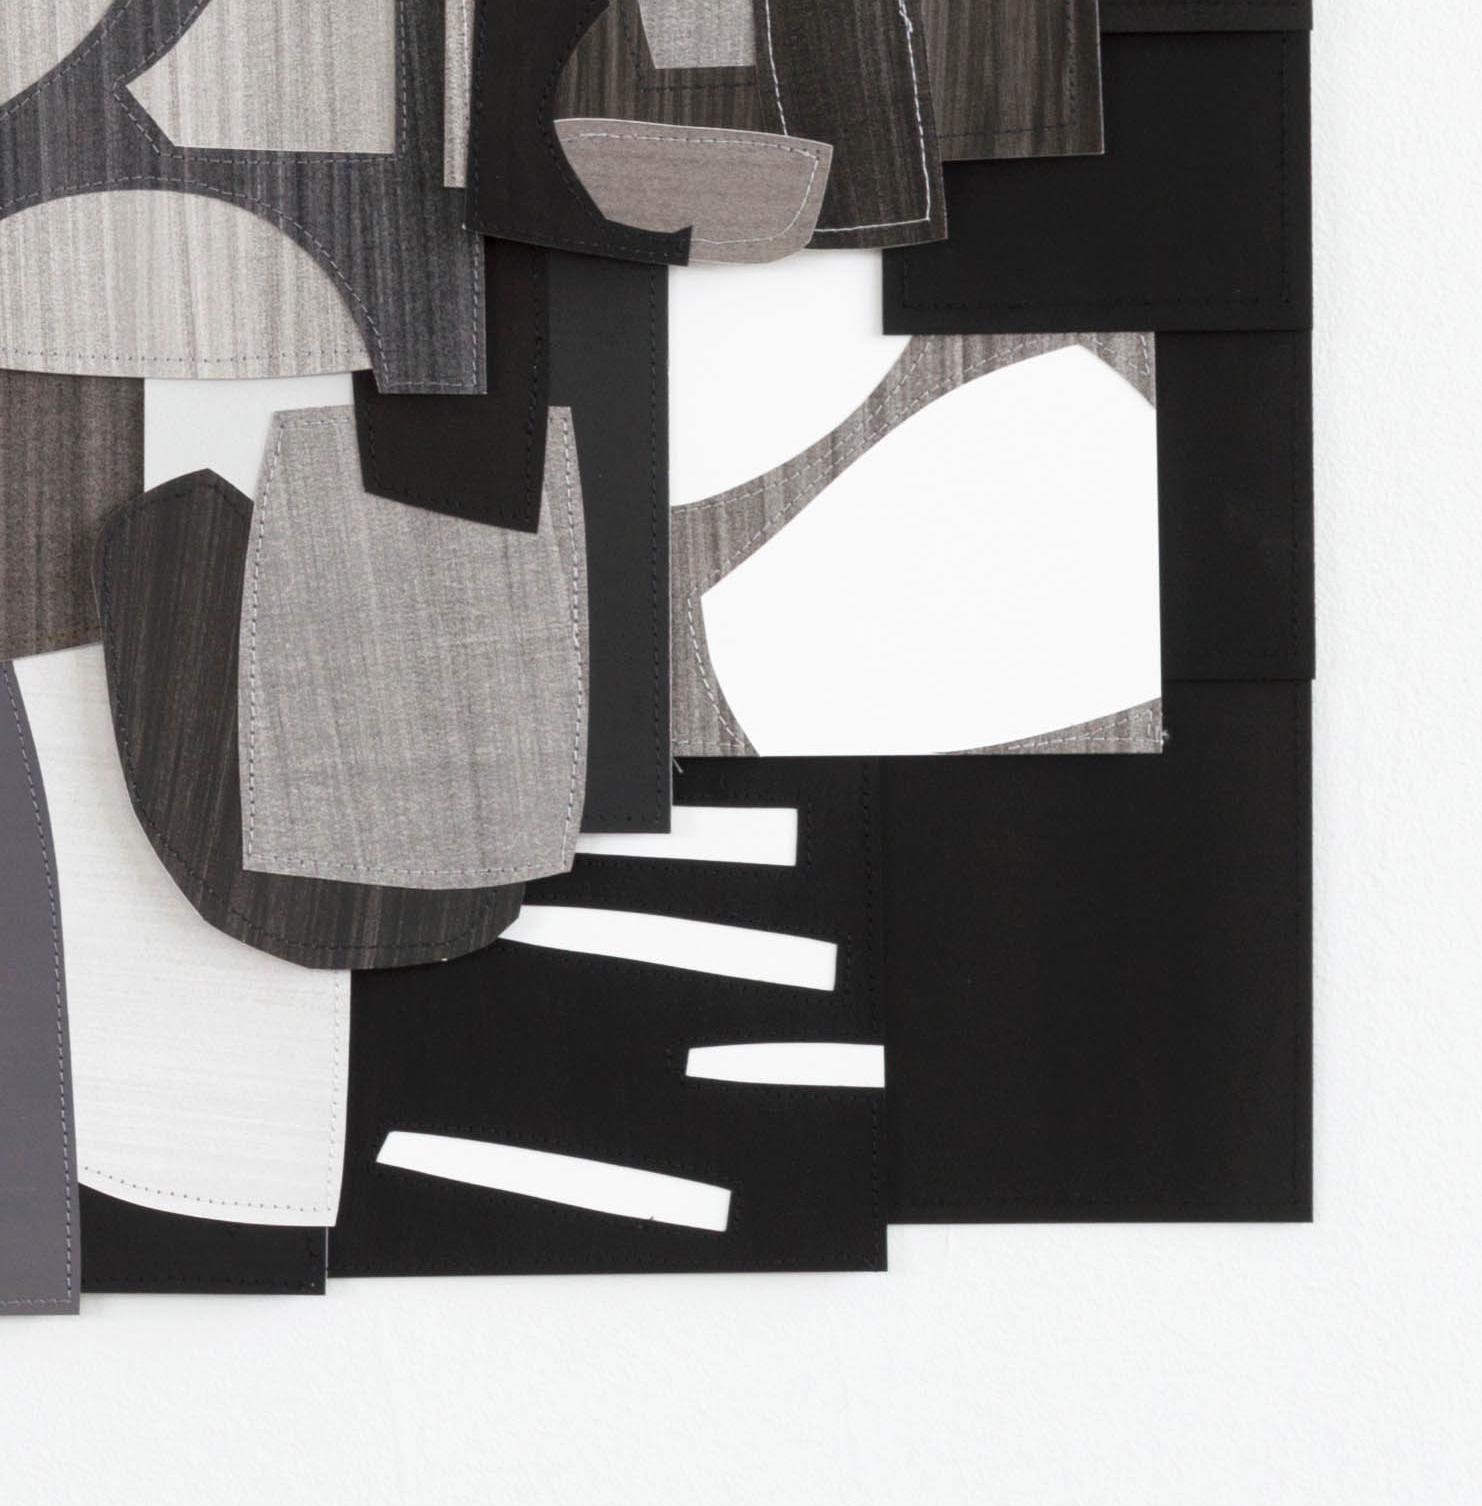 Raymond Saá’s Untitled (F) is primarily black, white, and gray. 

Raymond Saá’s collages are made of hand-painted paper, cut into various shapes that are then sewn together. The end result is an overlapping shingle-like pattern of color, shape, and